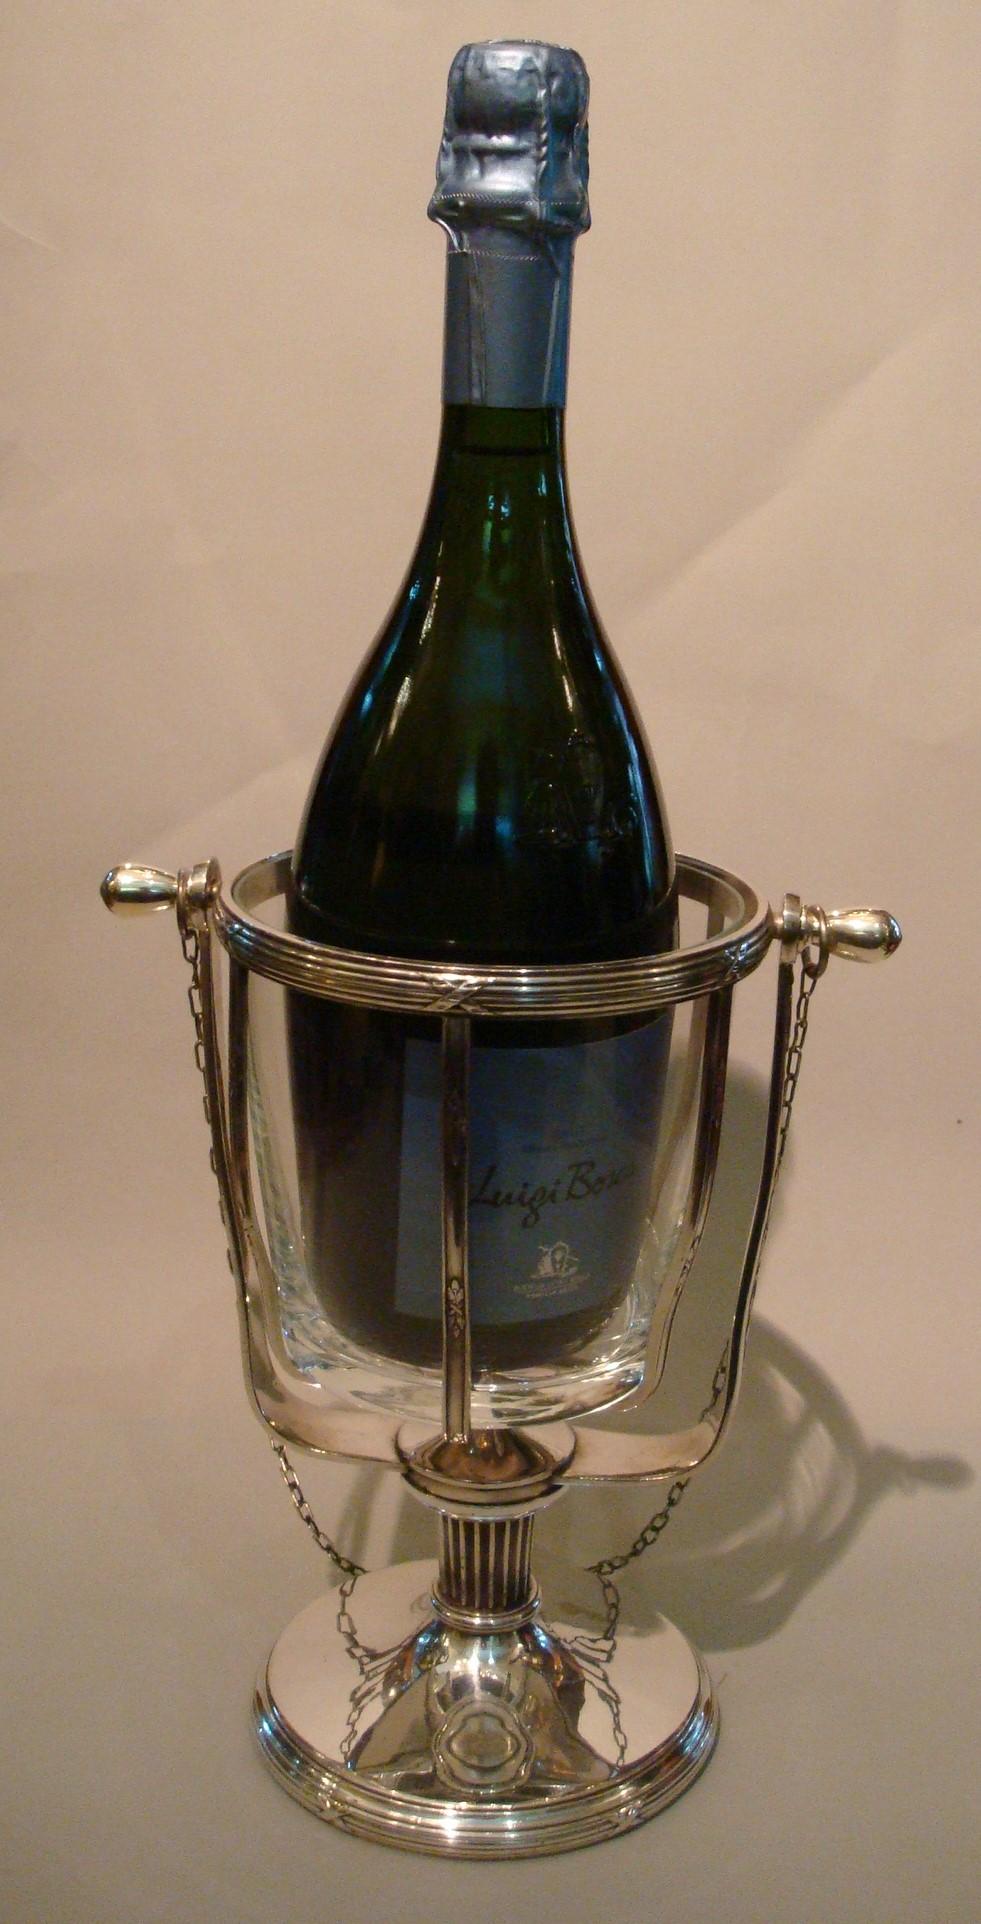 Antique balancing Nautical / ship / boat wine/champagne cooler holder with glass inner bowl.
This superb combination is in very good condition.
Rare bottle holder / cooler.
Beautiful and very rare balancing ship wine/champagne cooler-holder -